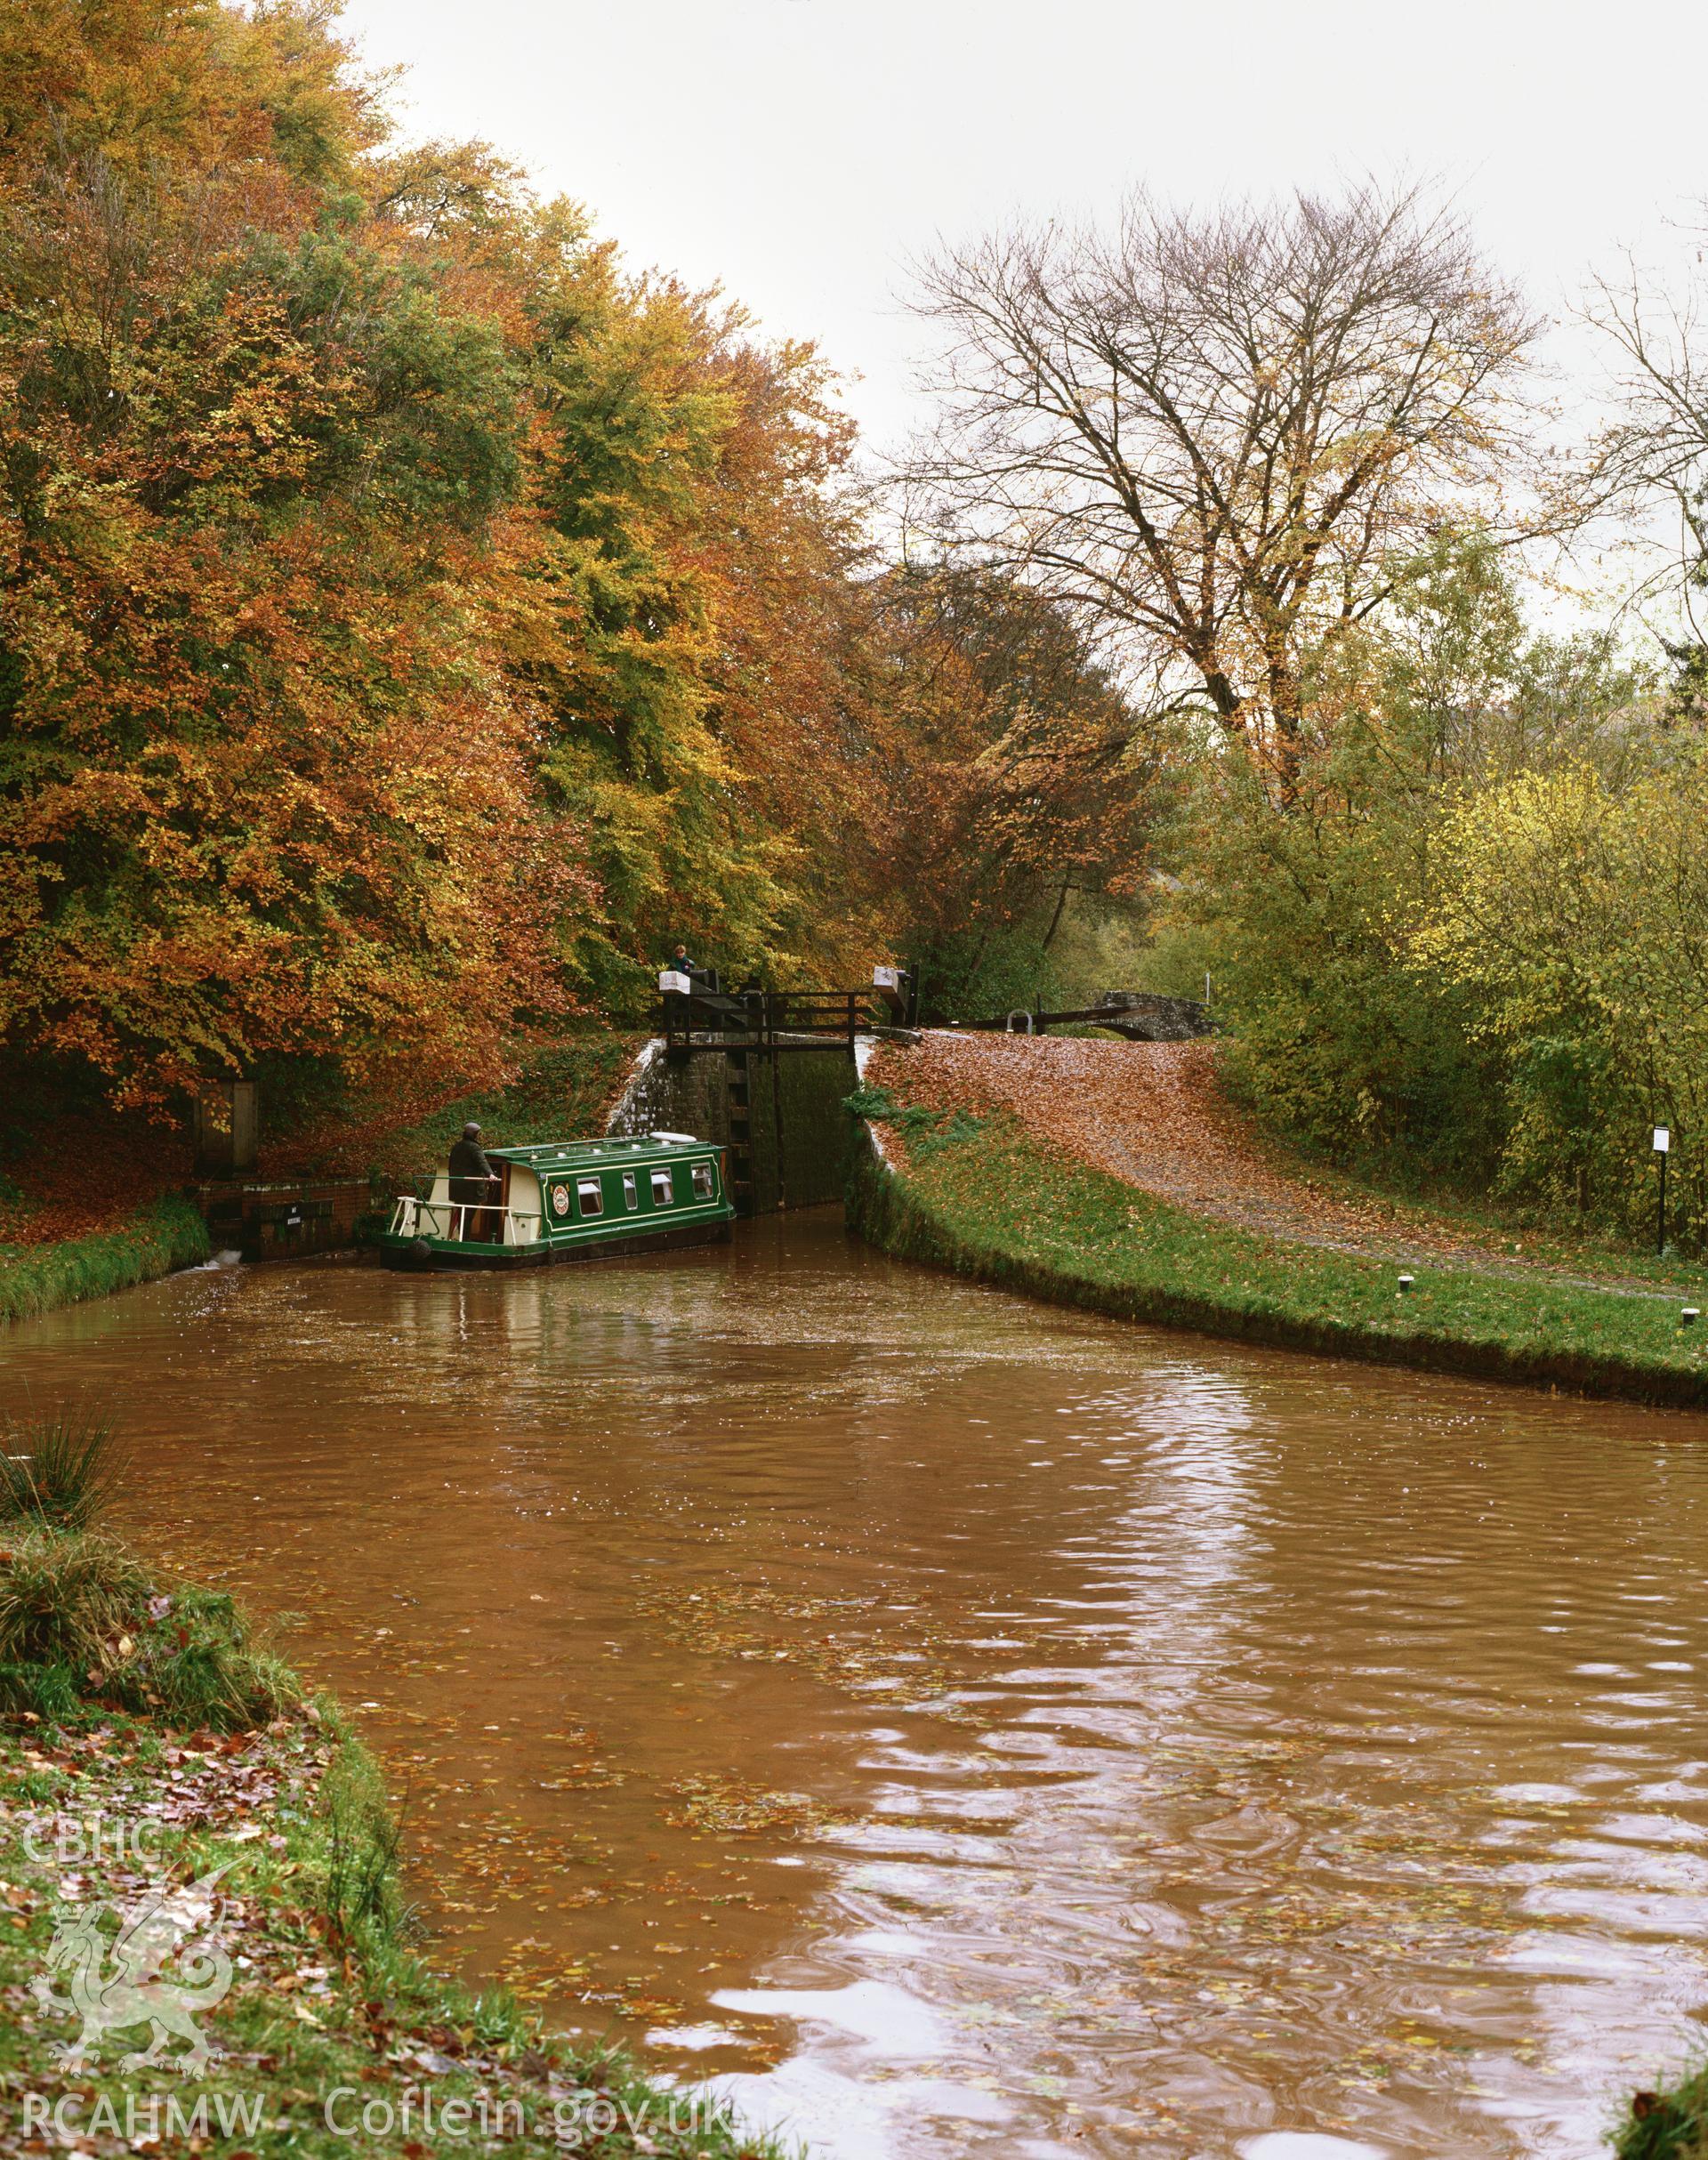 RCAHMW colour transparency showing the lock at Llangynidr Depot on the Monmouth Brecon Canal, taken by I.N. Wright, 1990